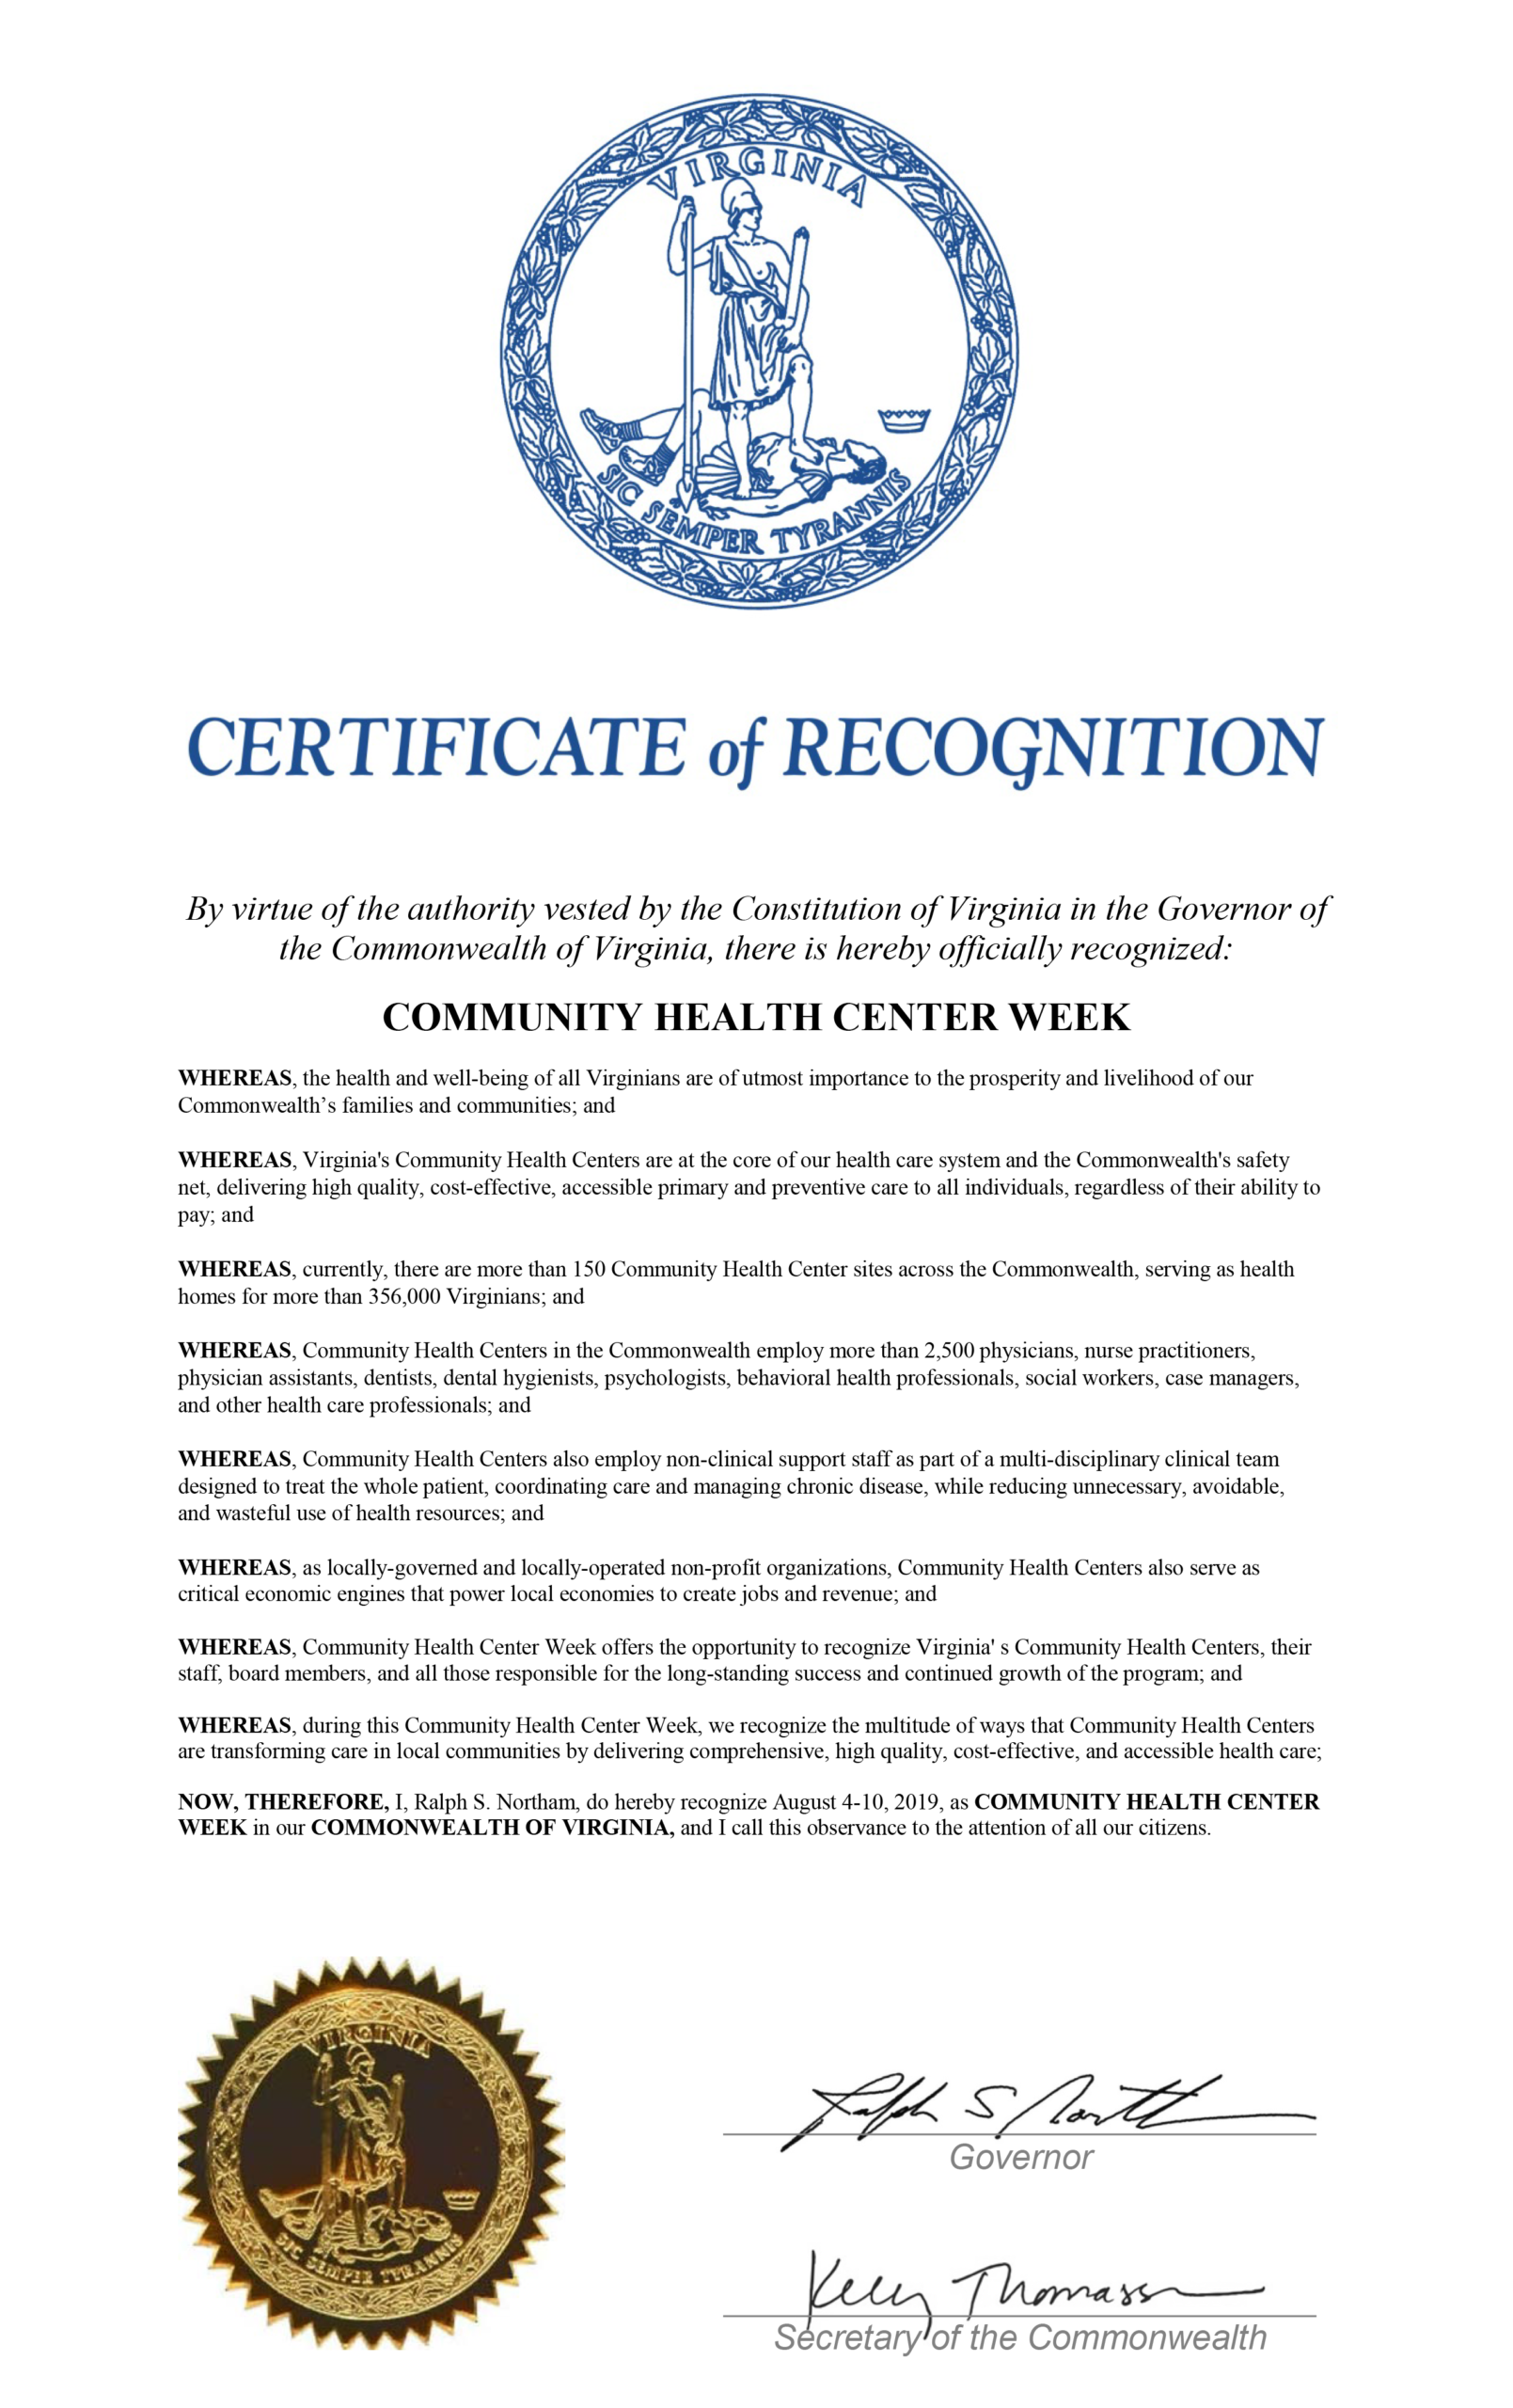 2019 Proclamation of Health Center Week in Virginia